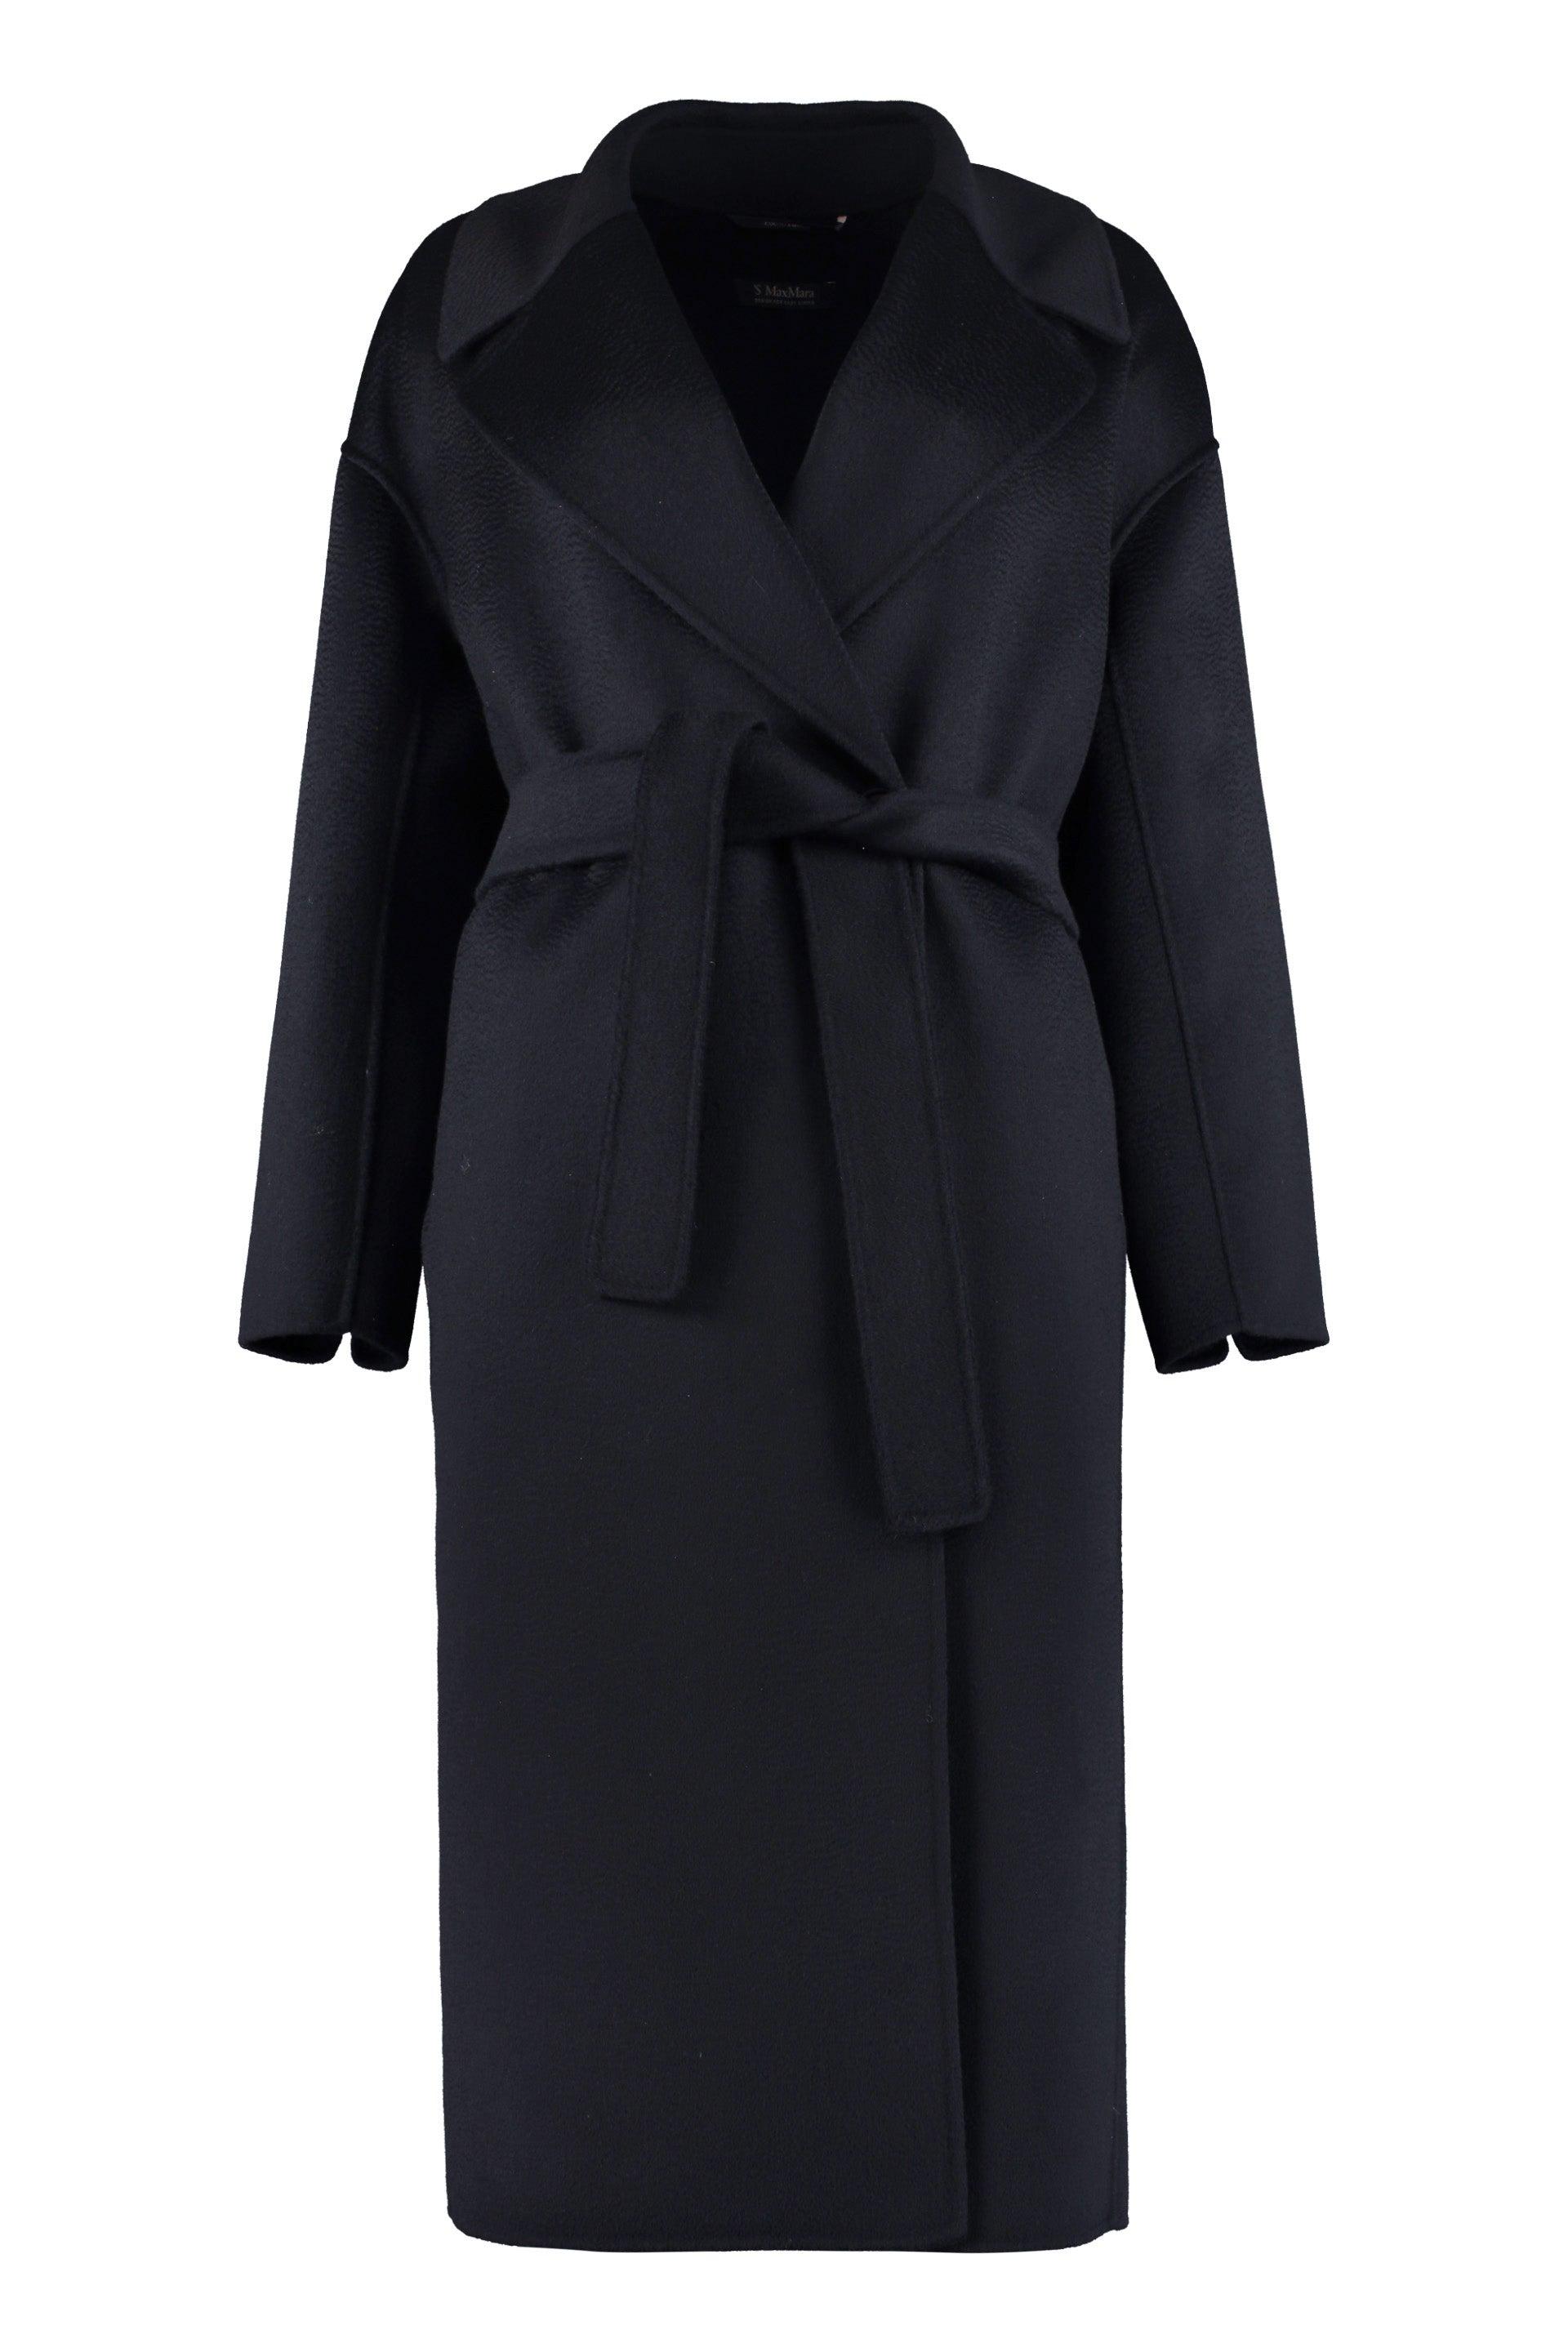 Max Mara Simone Double-breasted Wool And Cashmere Coat in Black | Lyst